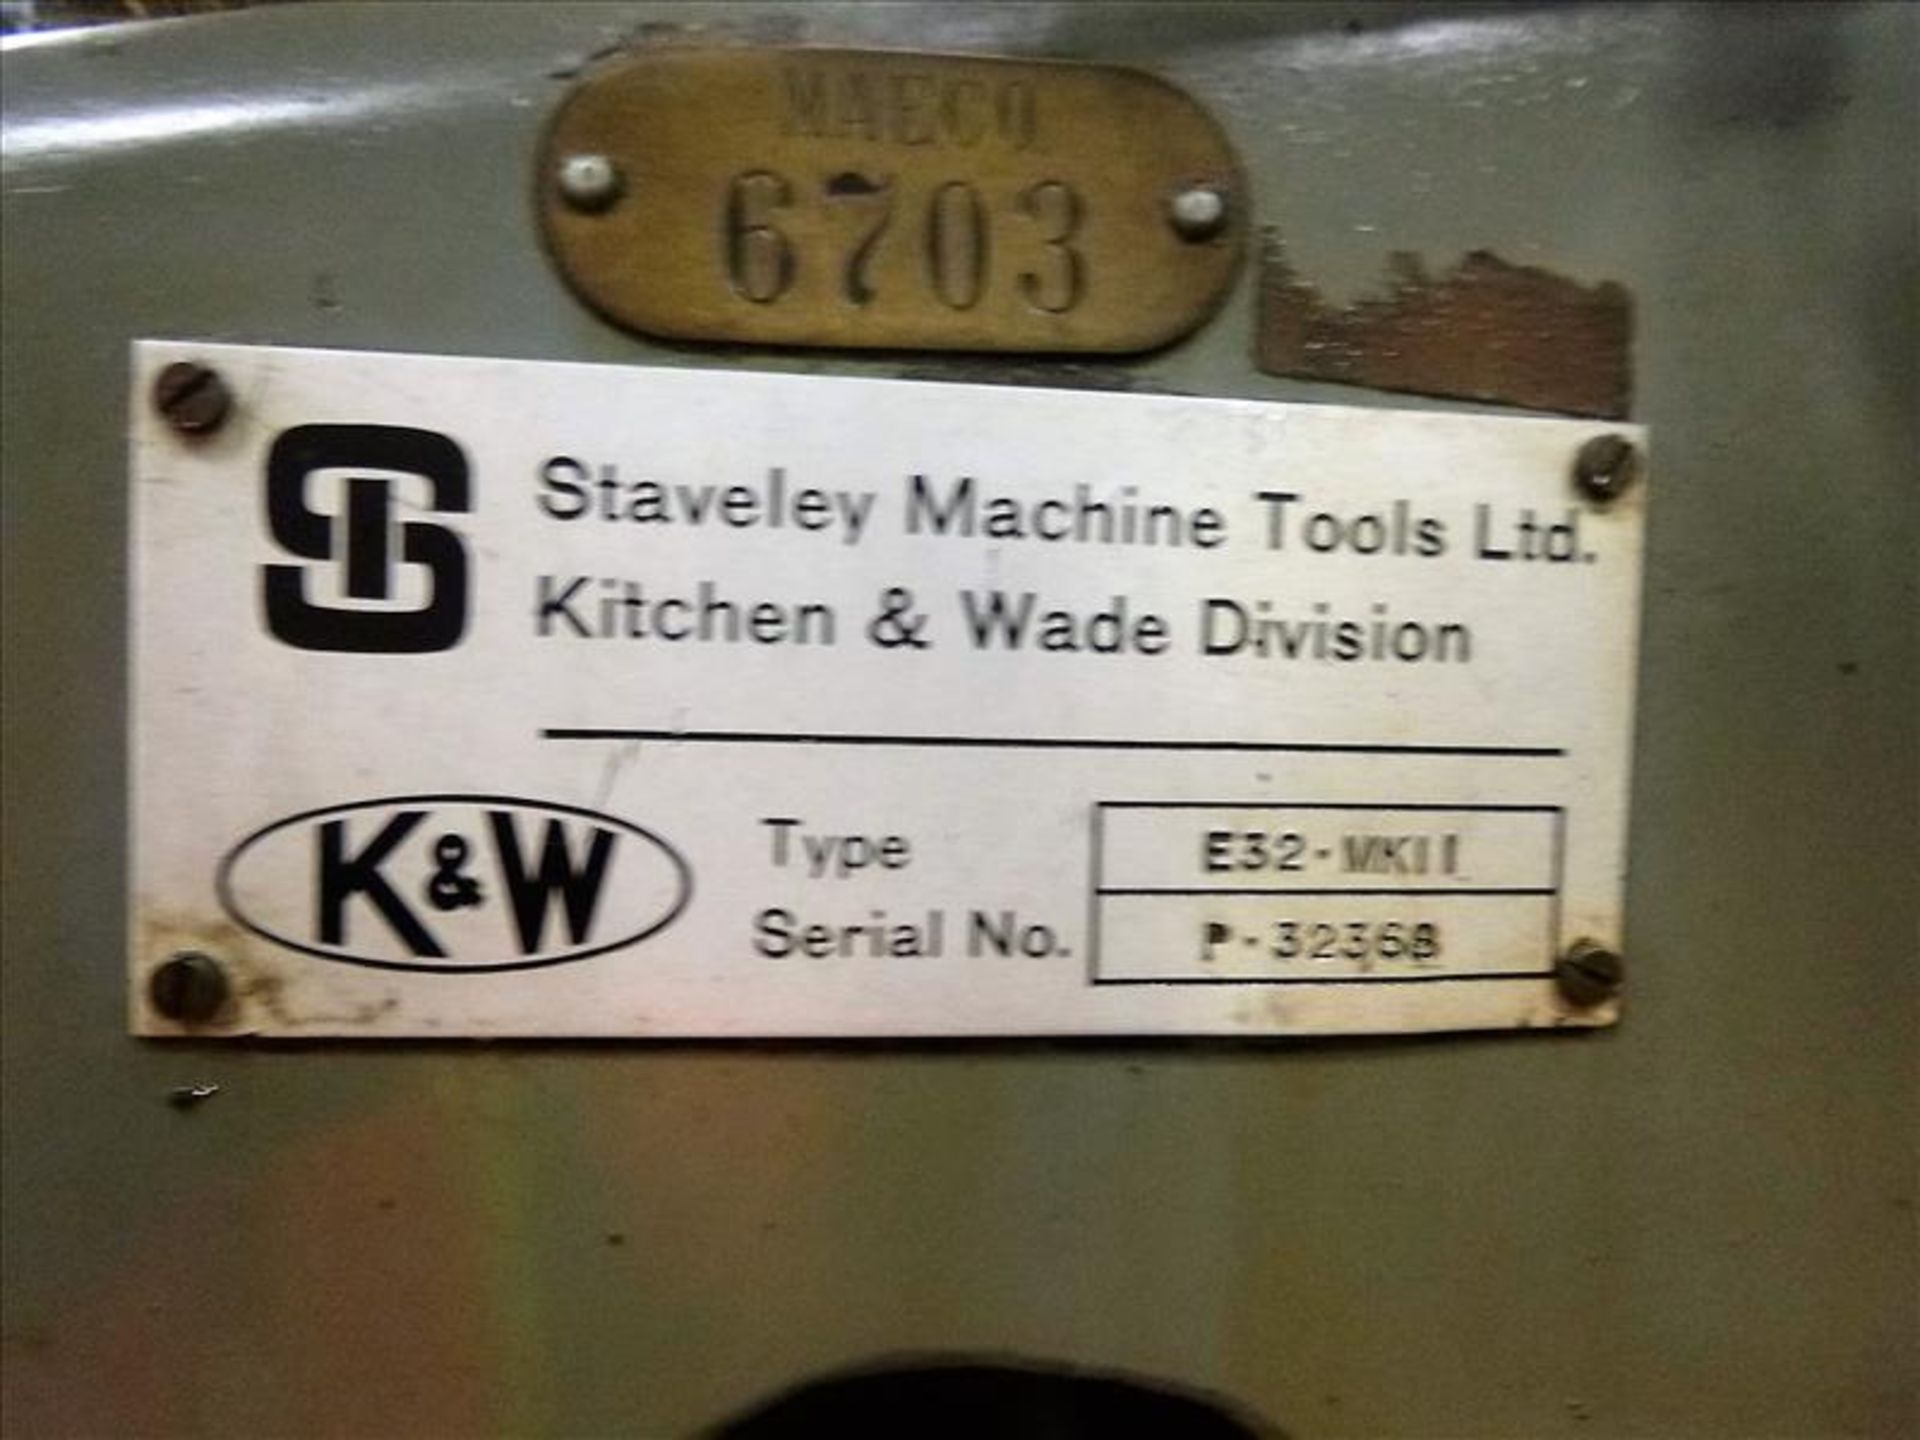 KITCHEN & WADE E32 MARK II 12/54 Radial Arm Drill - Image 6 of 6